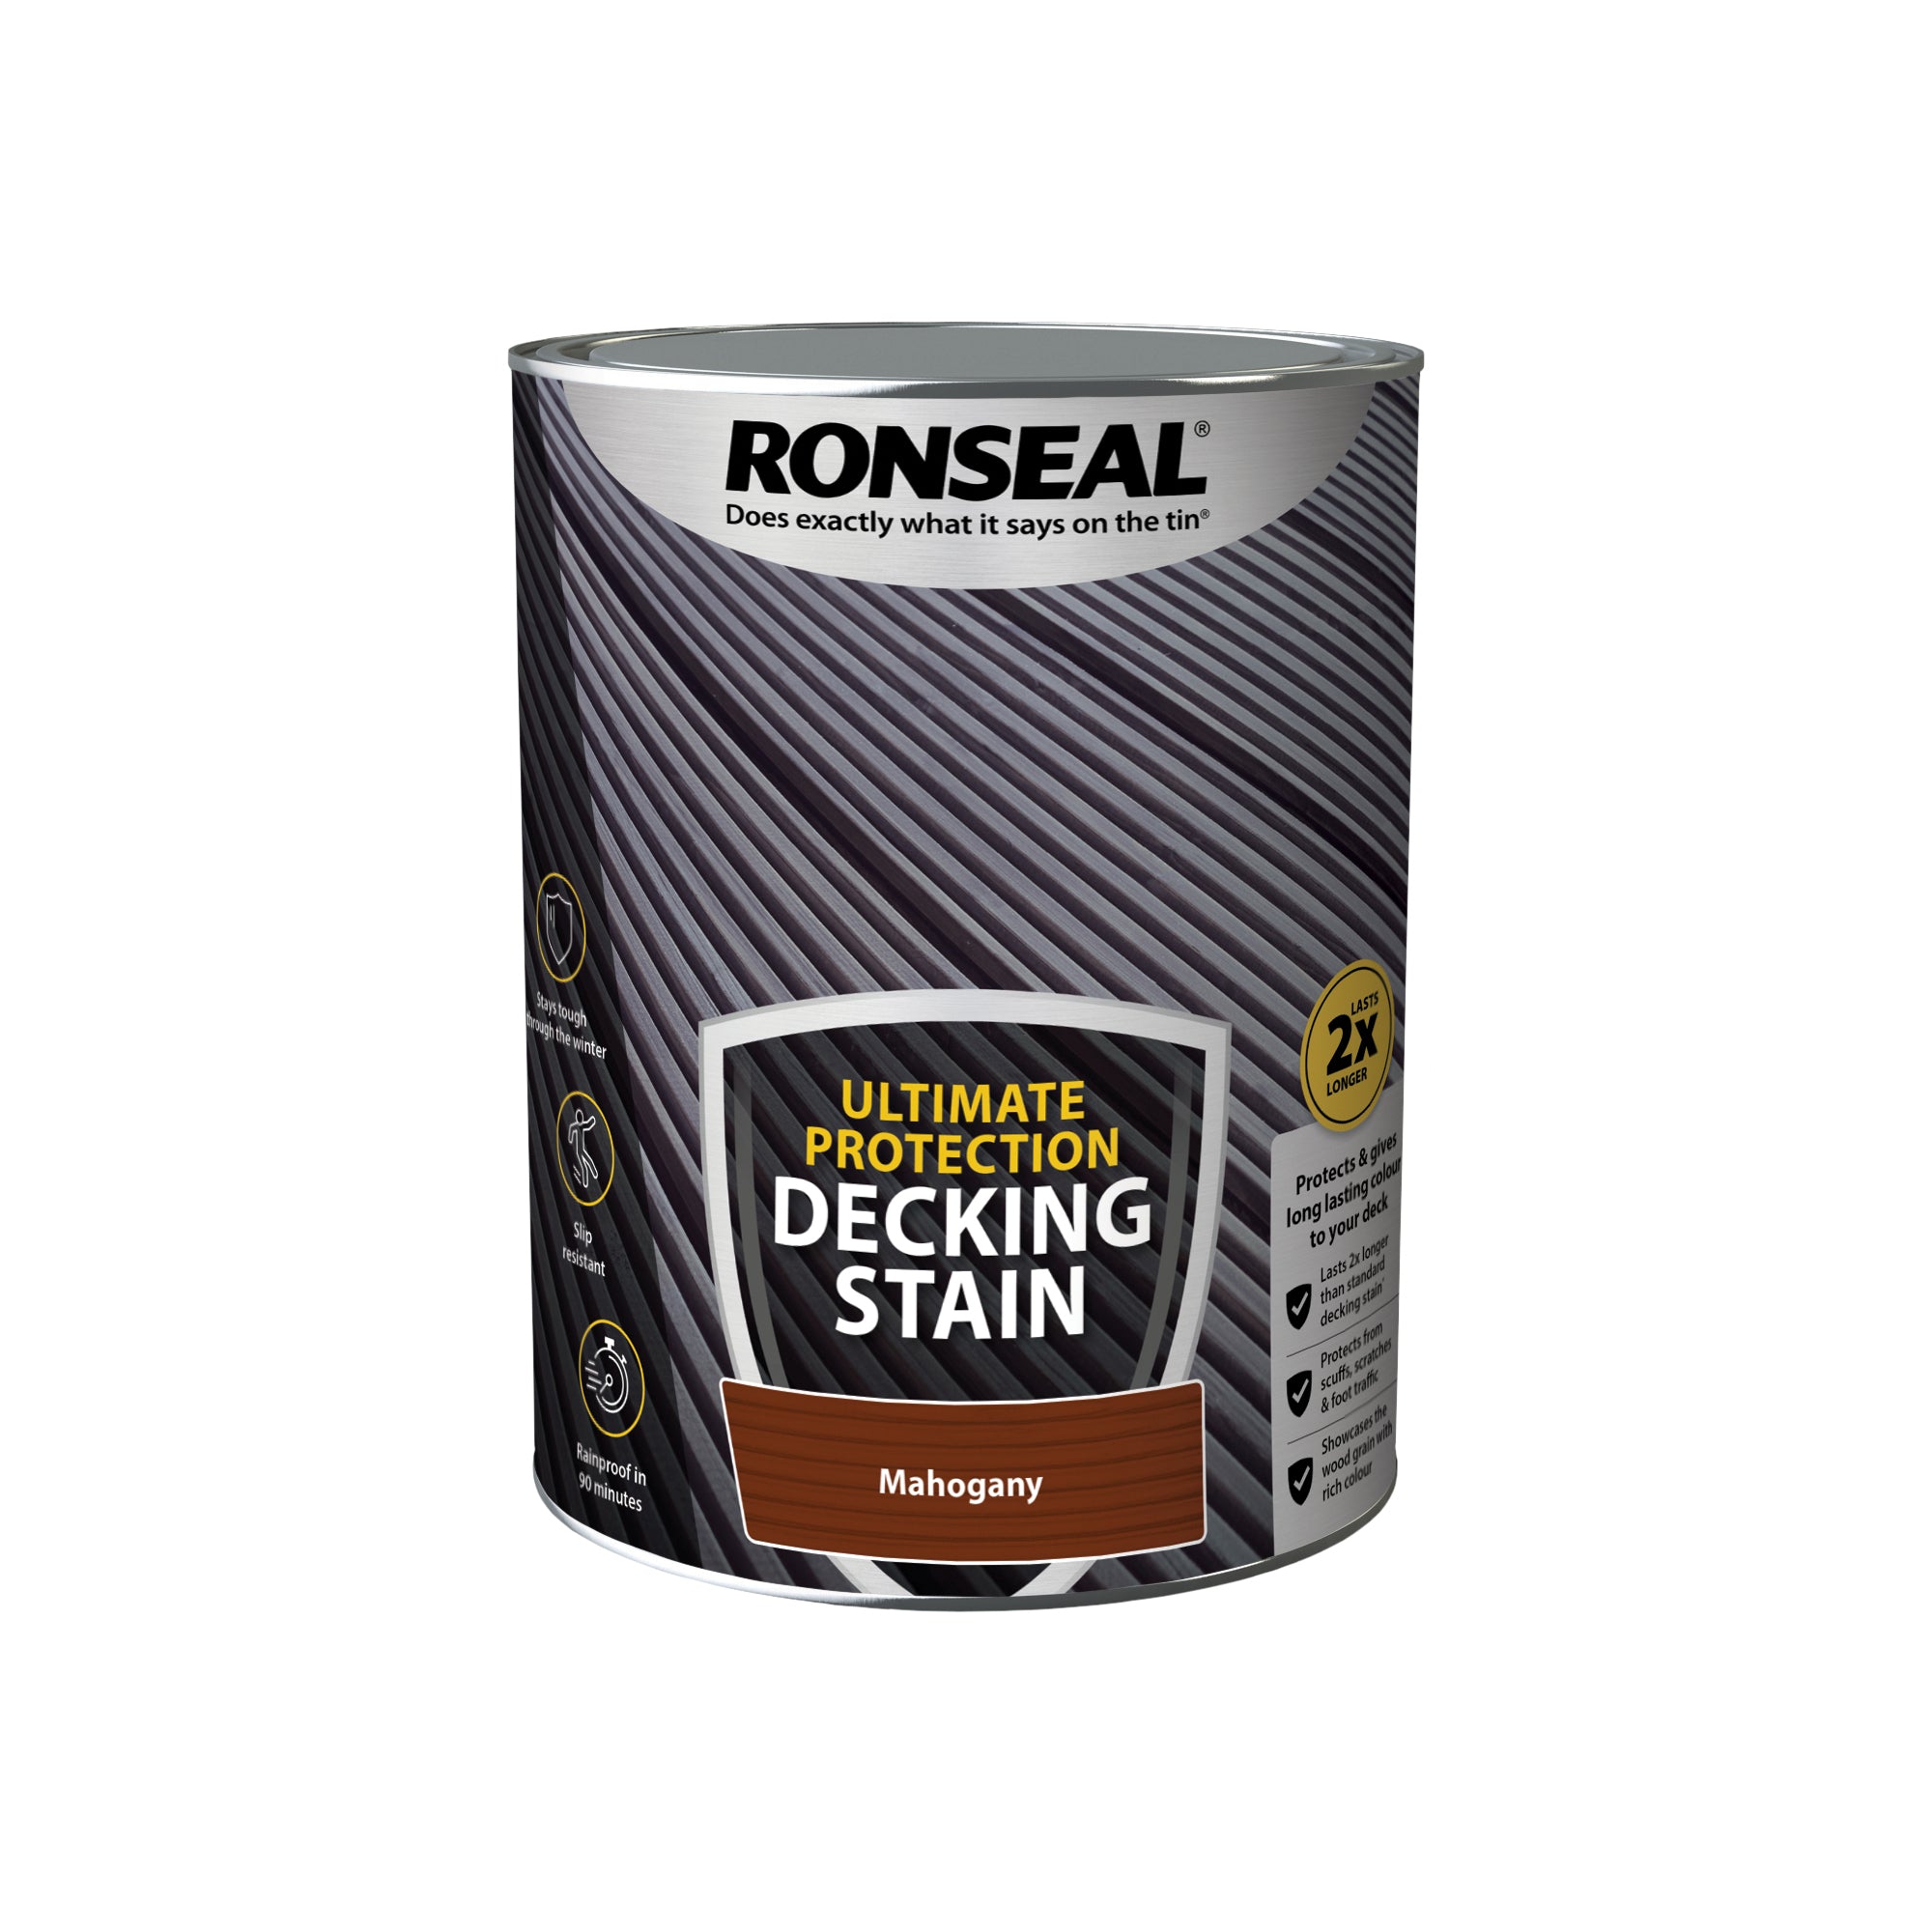 Ronseal-Ultimate-Protection-Decking-Stain-Mahogany-5L